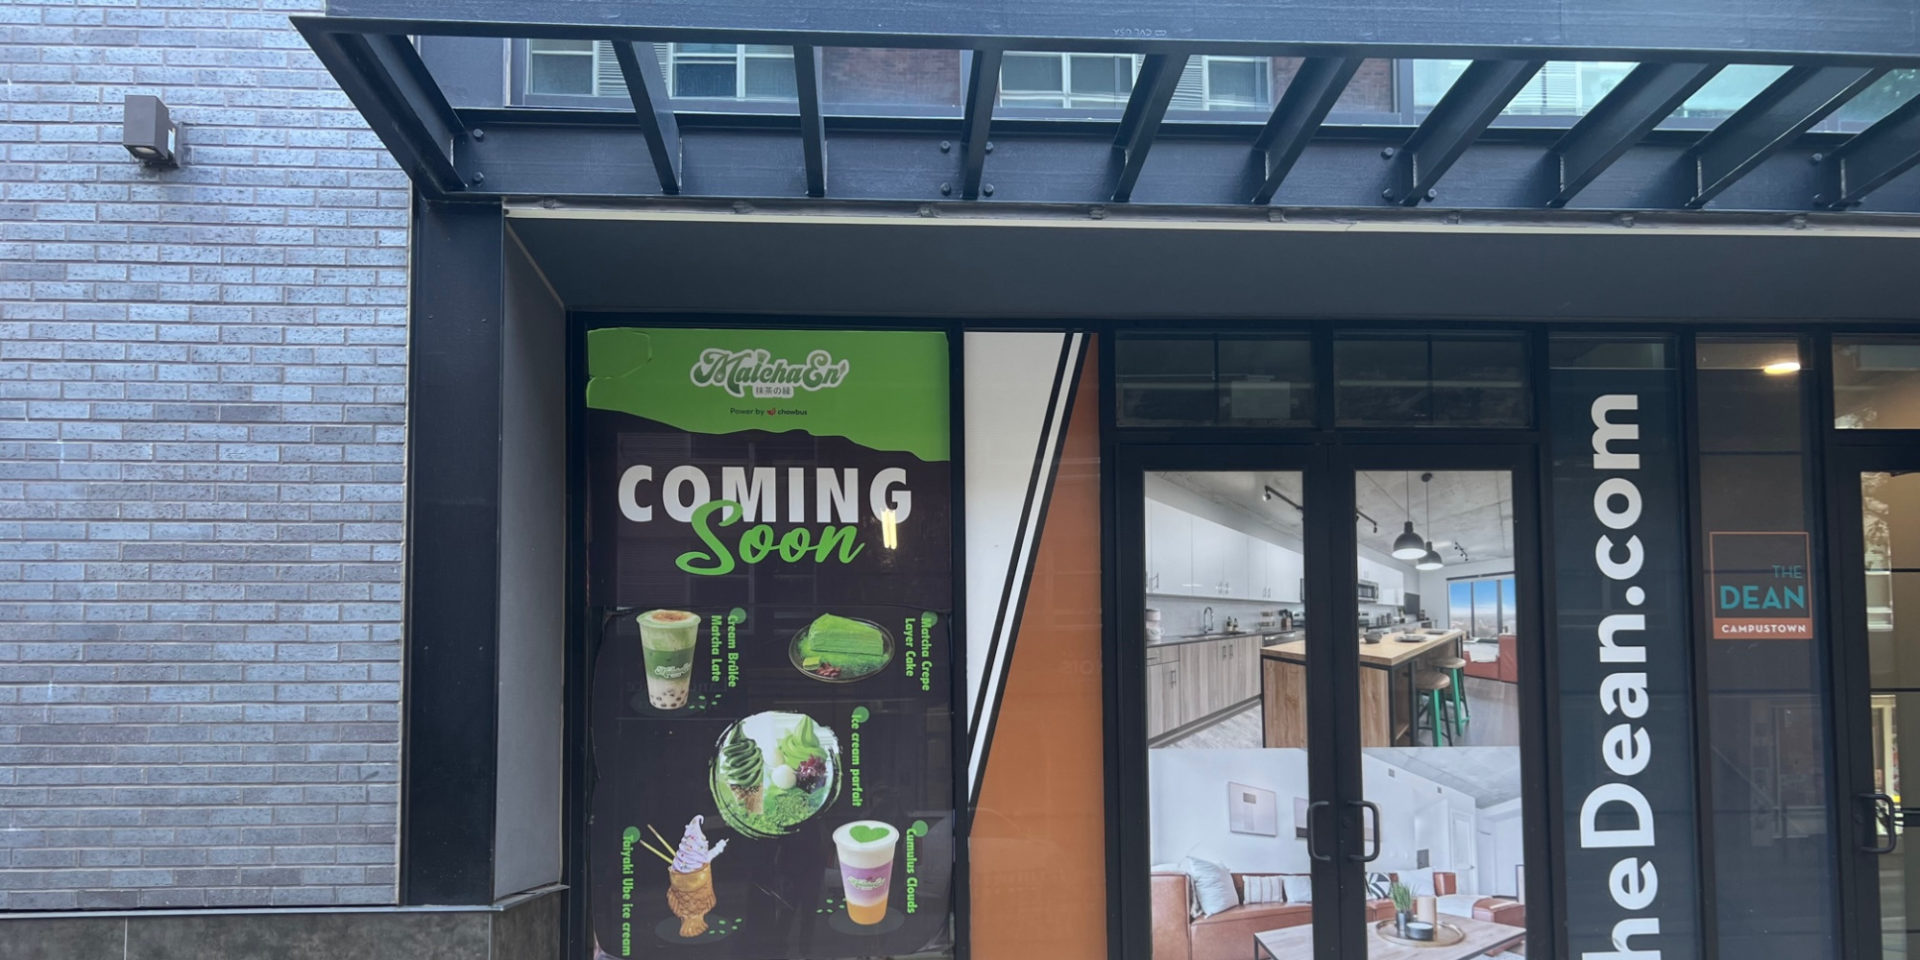 The exterior of The Dean Apartments in Campustown where a new matcha dessert place will open. Photo by Alyssa Buckley.